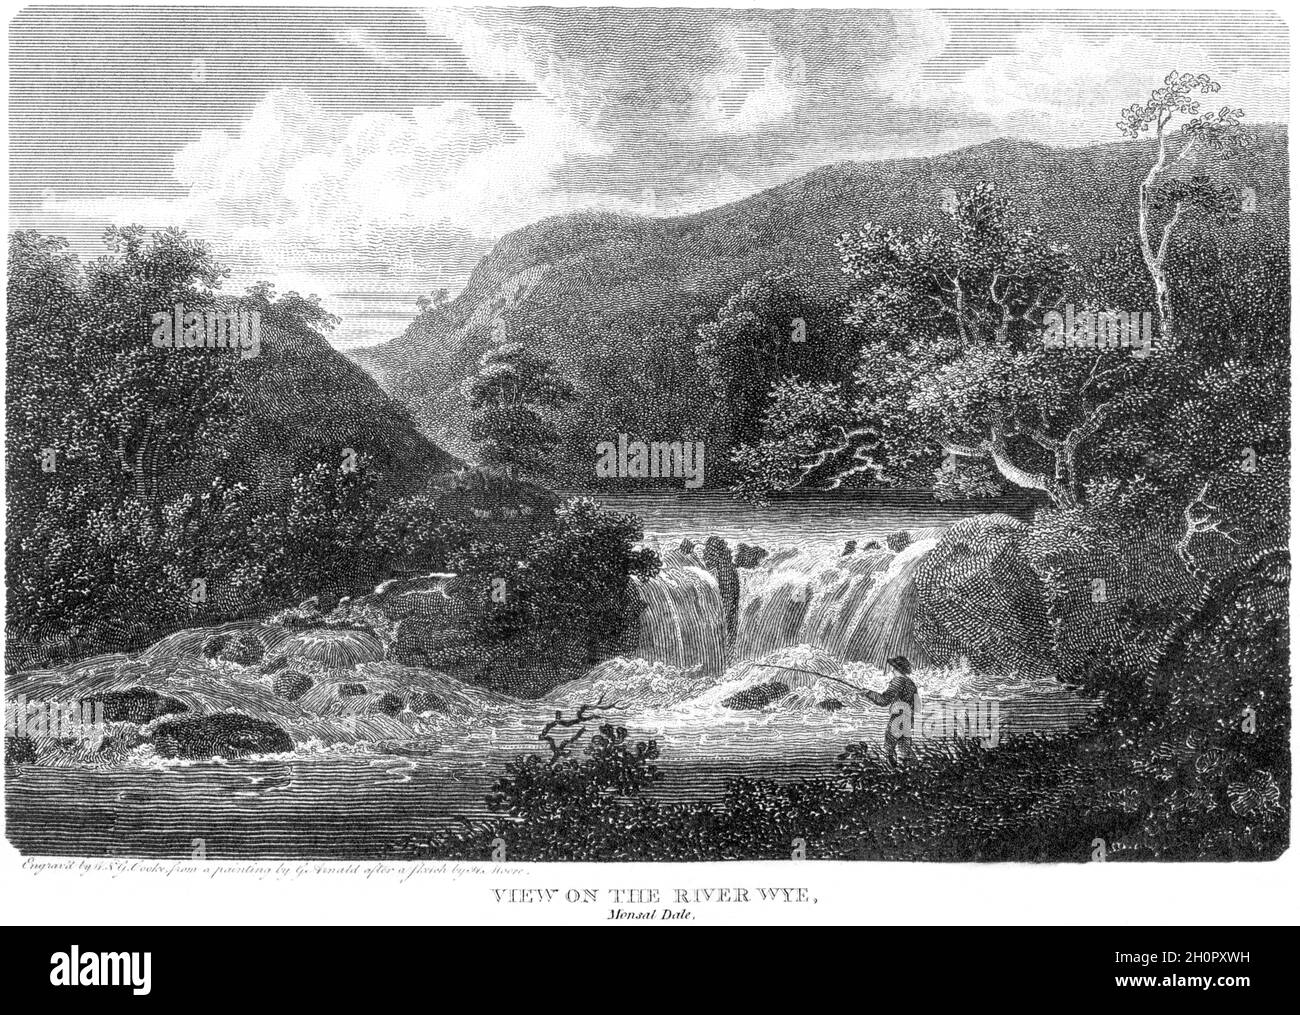 An engraving of a View on the River Wye, Monsal Dale, Derbyshire UK scanned at high resolution from a book printed in 1812. Believed copyright free. Stock Photo